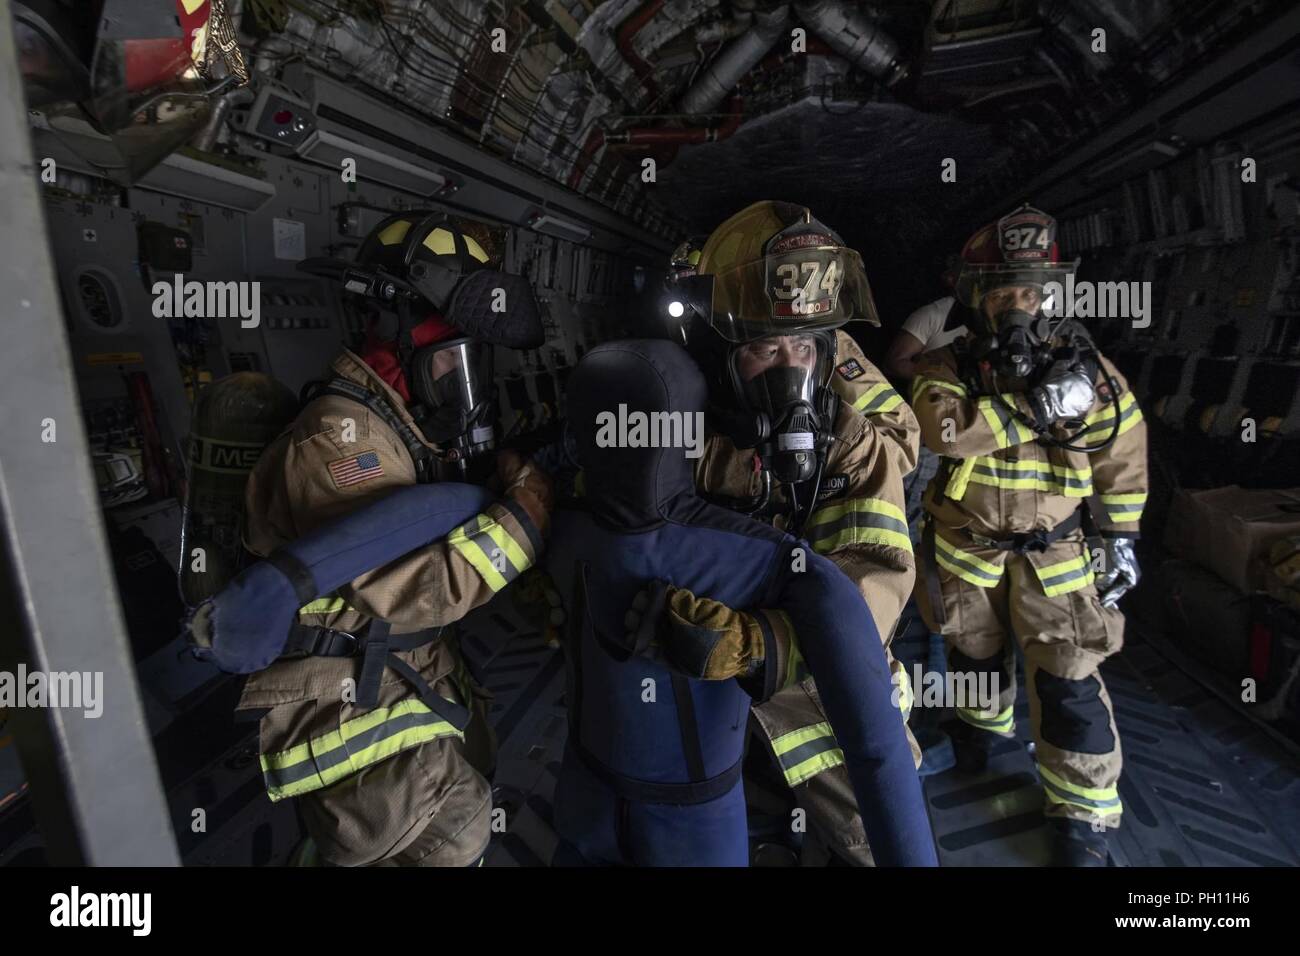 Firefighters from the 374th Civil Engineer Squadron pull a simulated patient from a C-17 Globemaster III cockpit during an Emergency Response Exercise at Yokota Air Base, Japan, June 25, 2018. Airmen from the 730th Air Mobility Squadron and 374th CES fire department conducted a simulated fire aboard a C-17 and familiarization training. Stock Photo